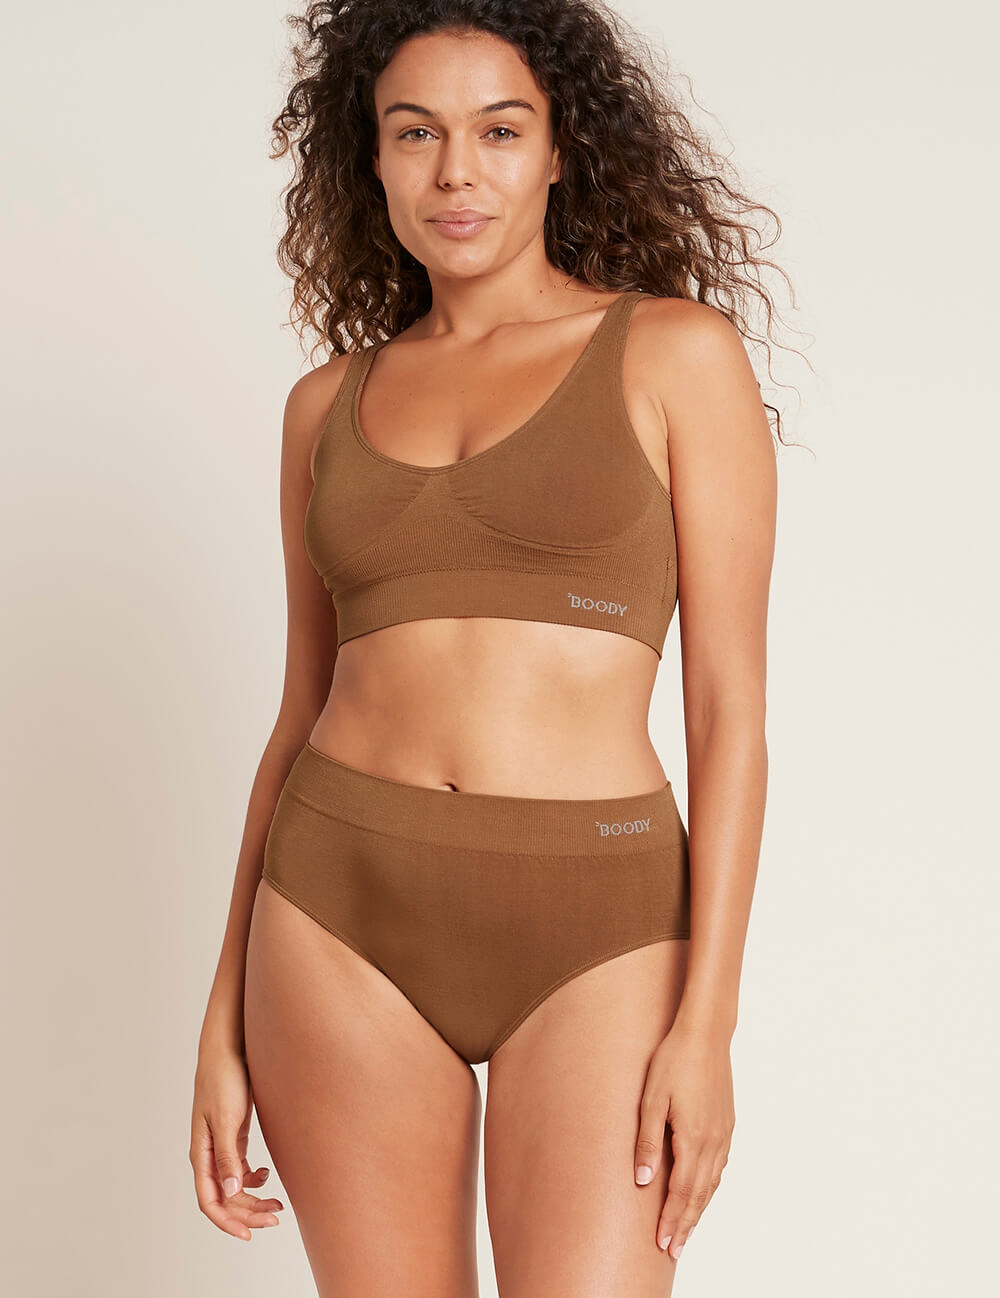 Boody Bamboo Shaper Bra in Nude 4 Front View